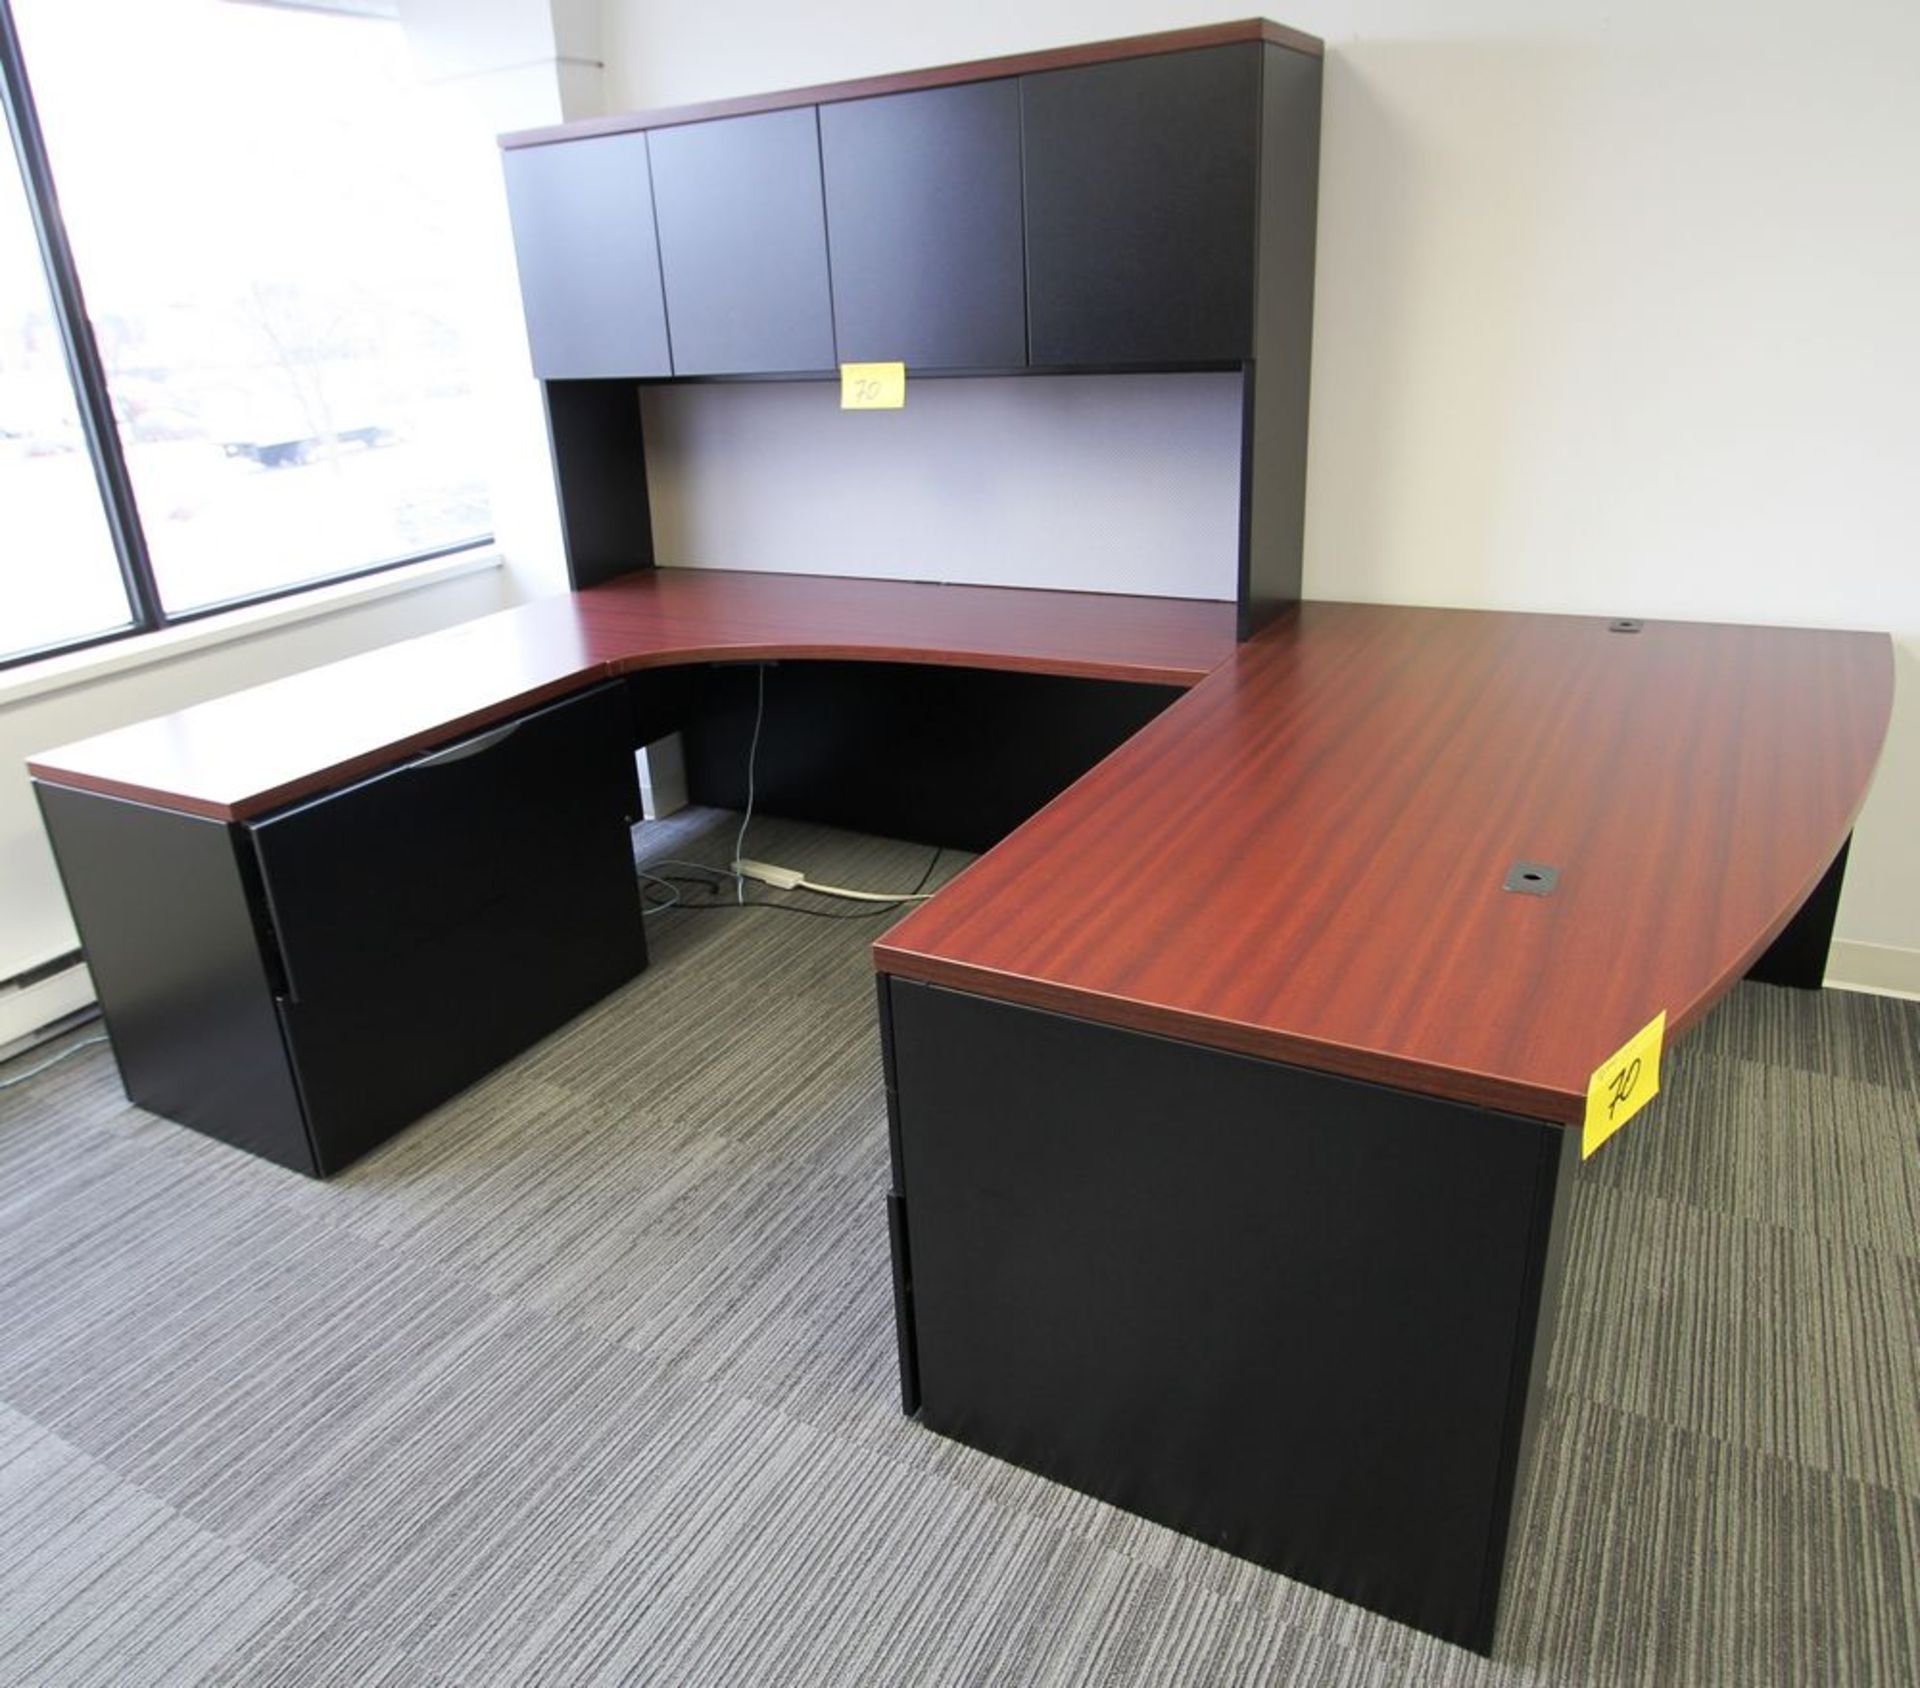 U-SHAPED DESK W/ OVERHEAD STORAGE, FILING CABINET AND MATCHING STORAGE CABINET - Image 2 of 6